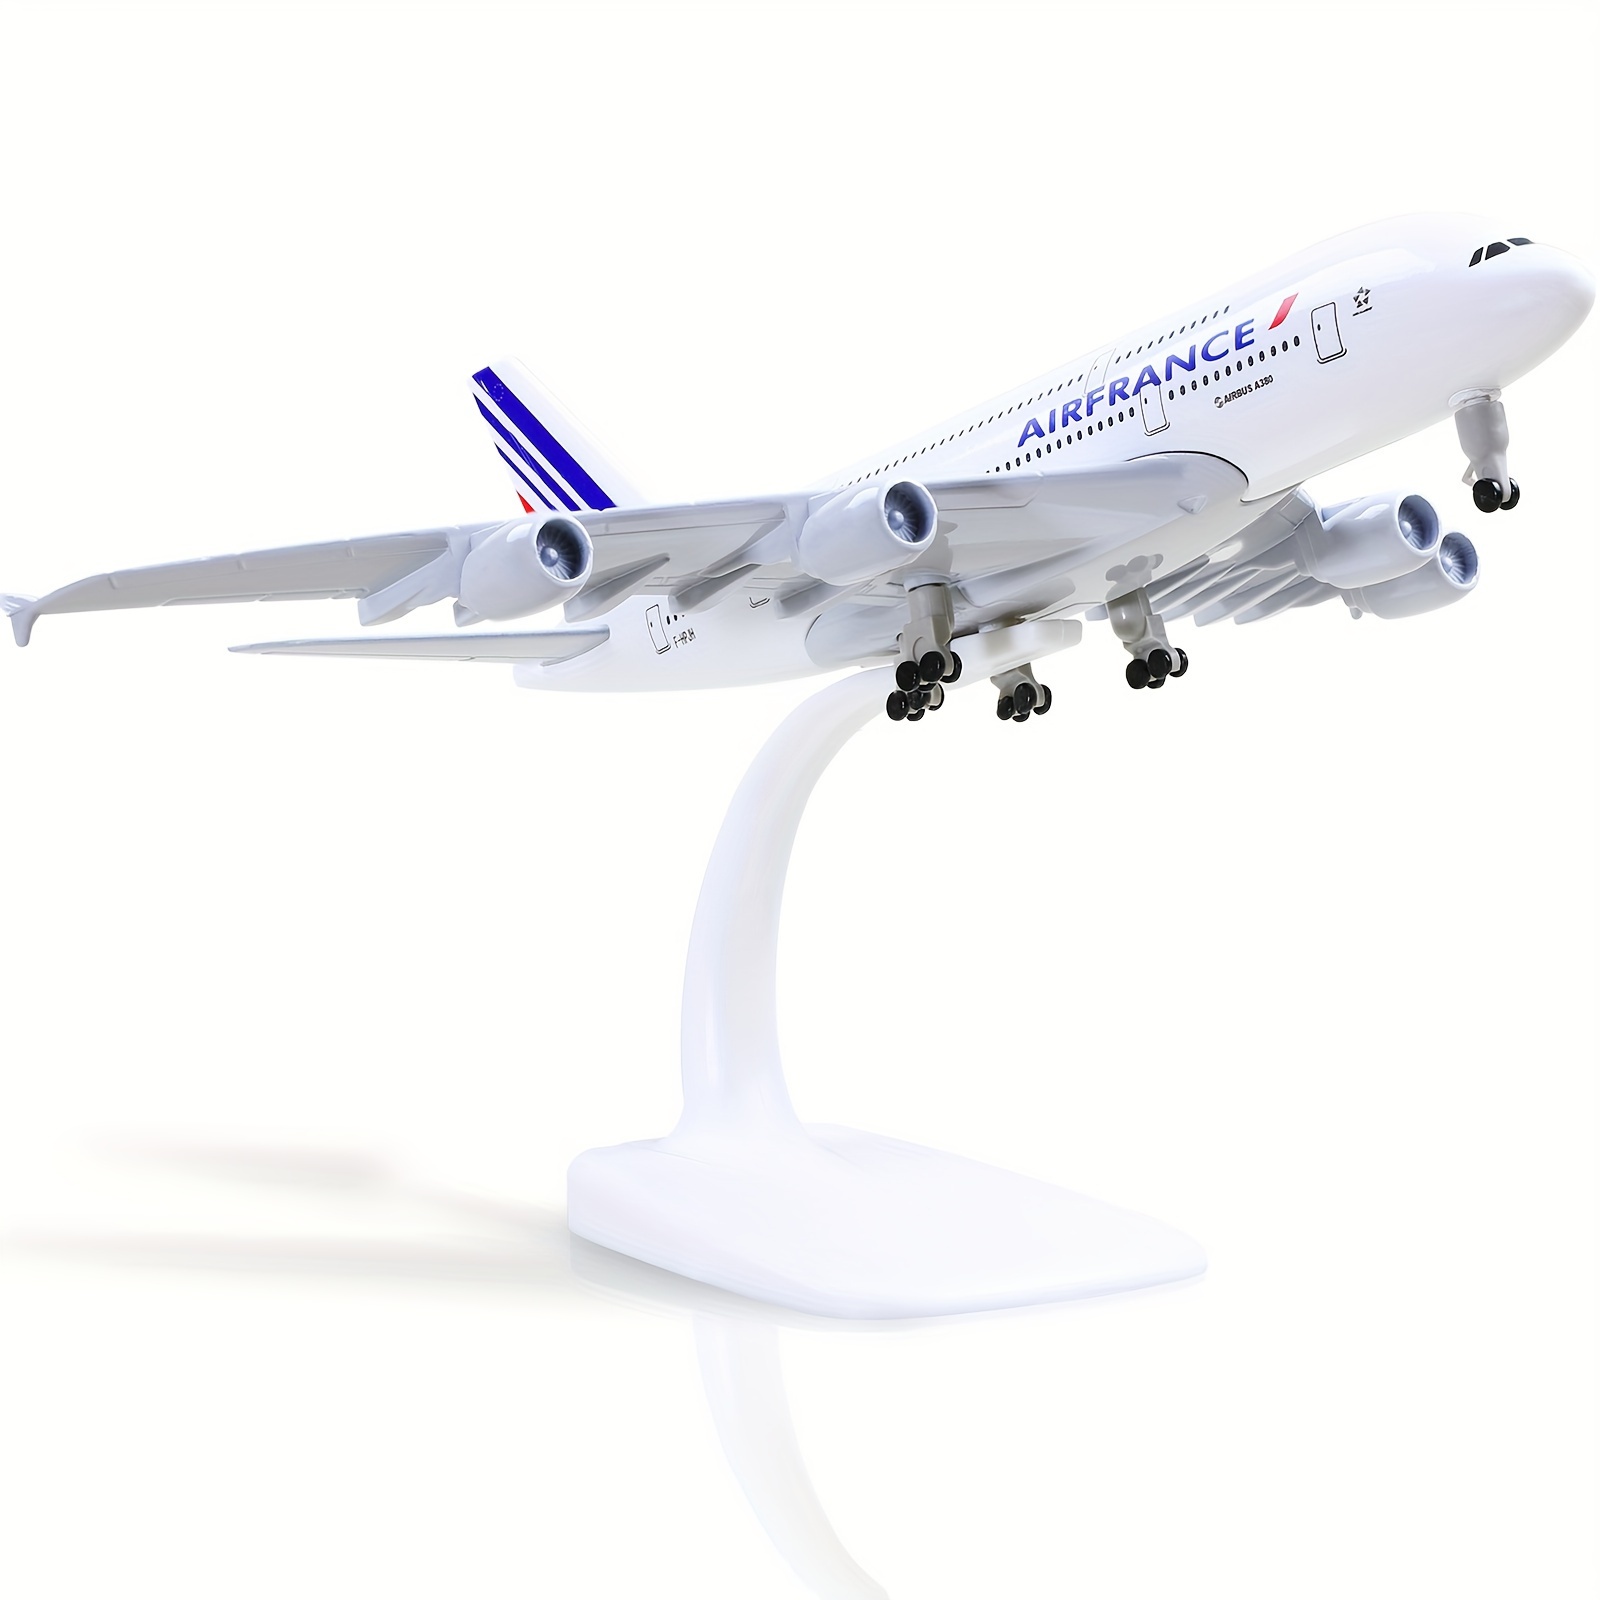 

Model Plane 1:300 Scale Airbus A380 Airplane Air France 7.9 Inch Metal Alloy Die-cast Airplanes For Gift And Collection